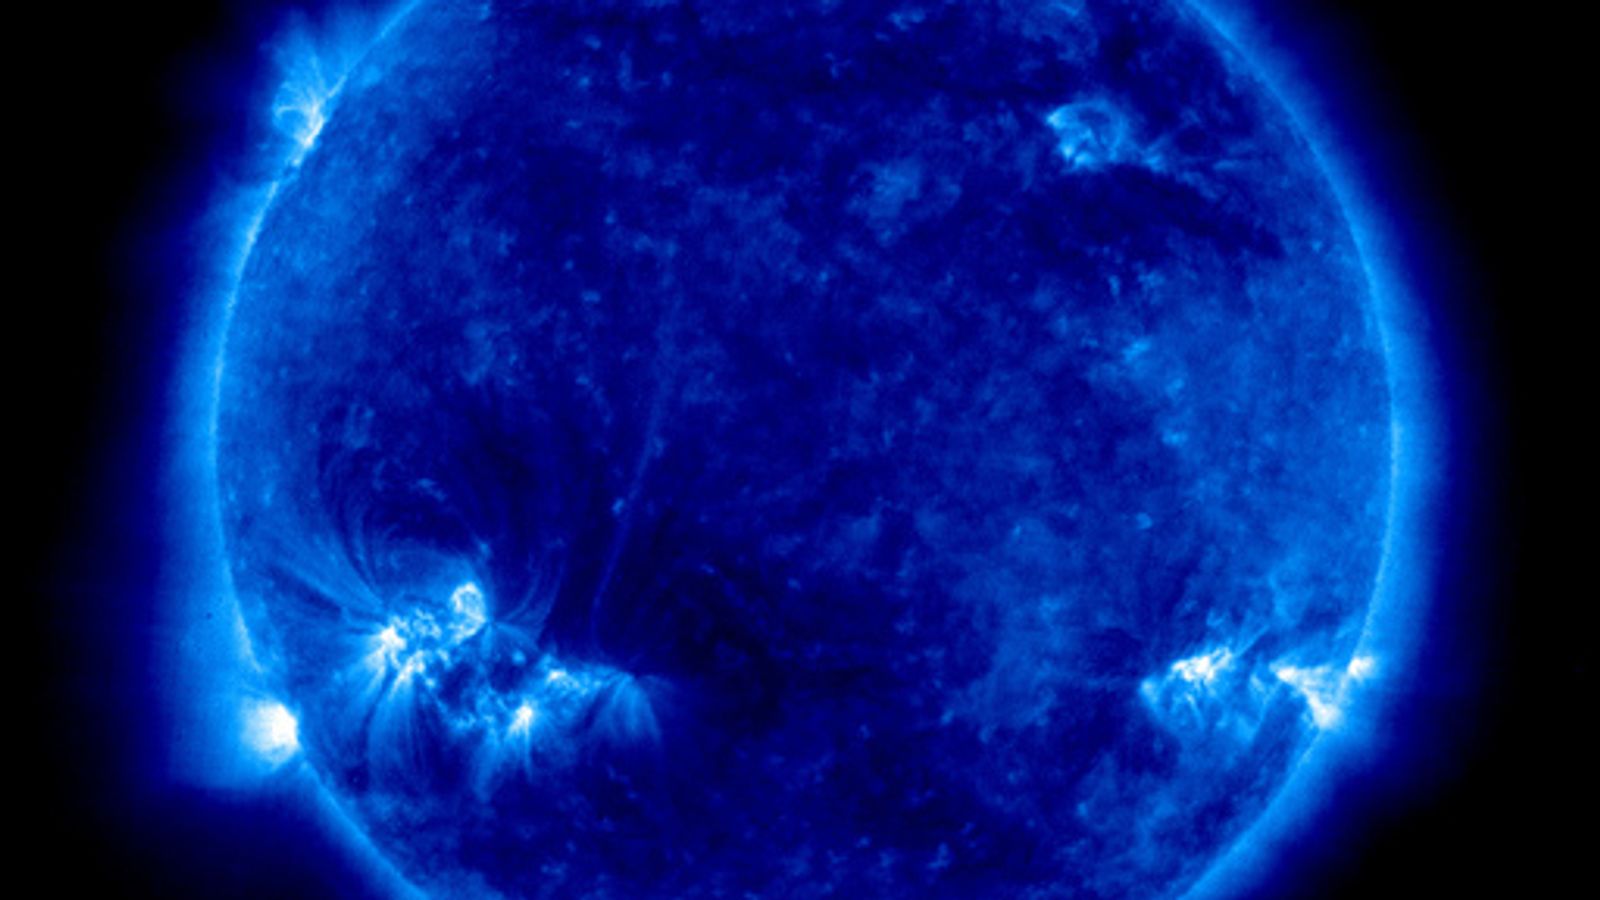 rare giant explosions on sun's surface could help nasa find out what we need to live on mars